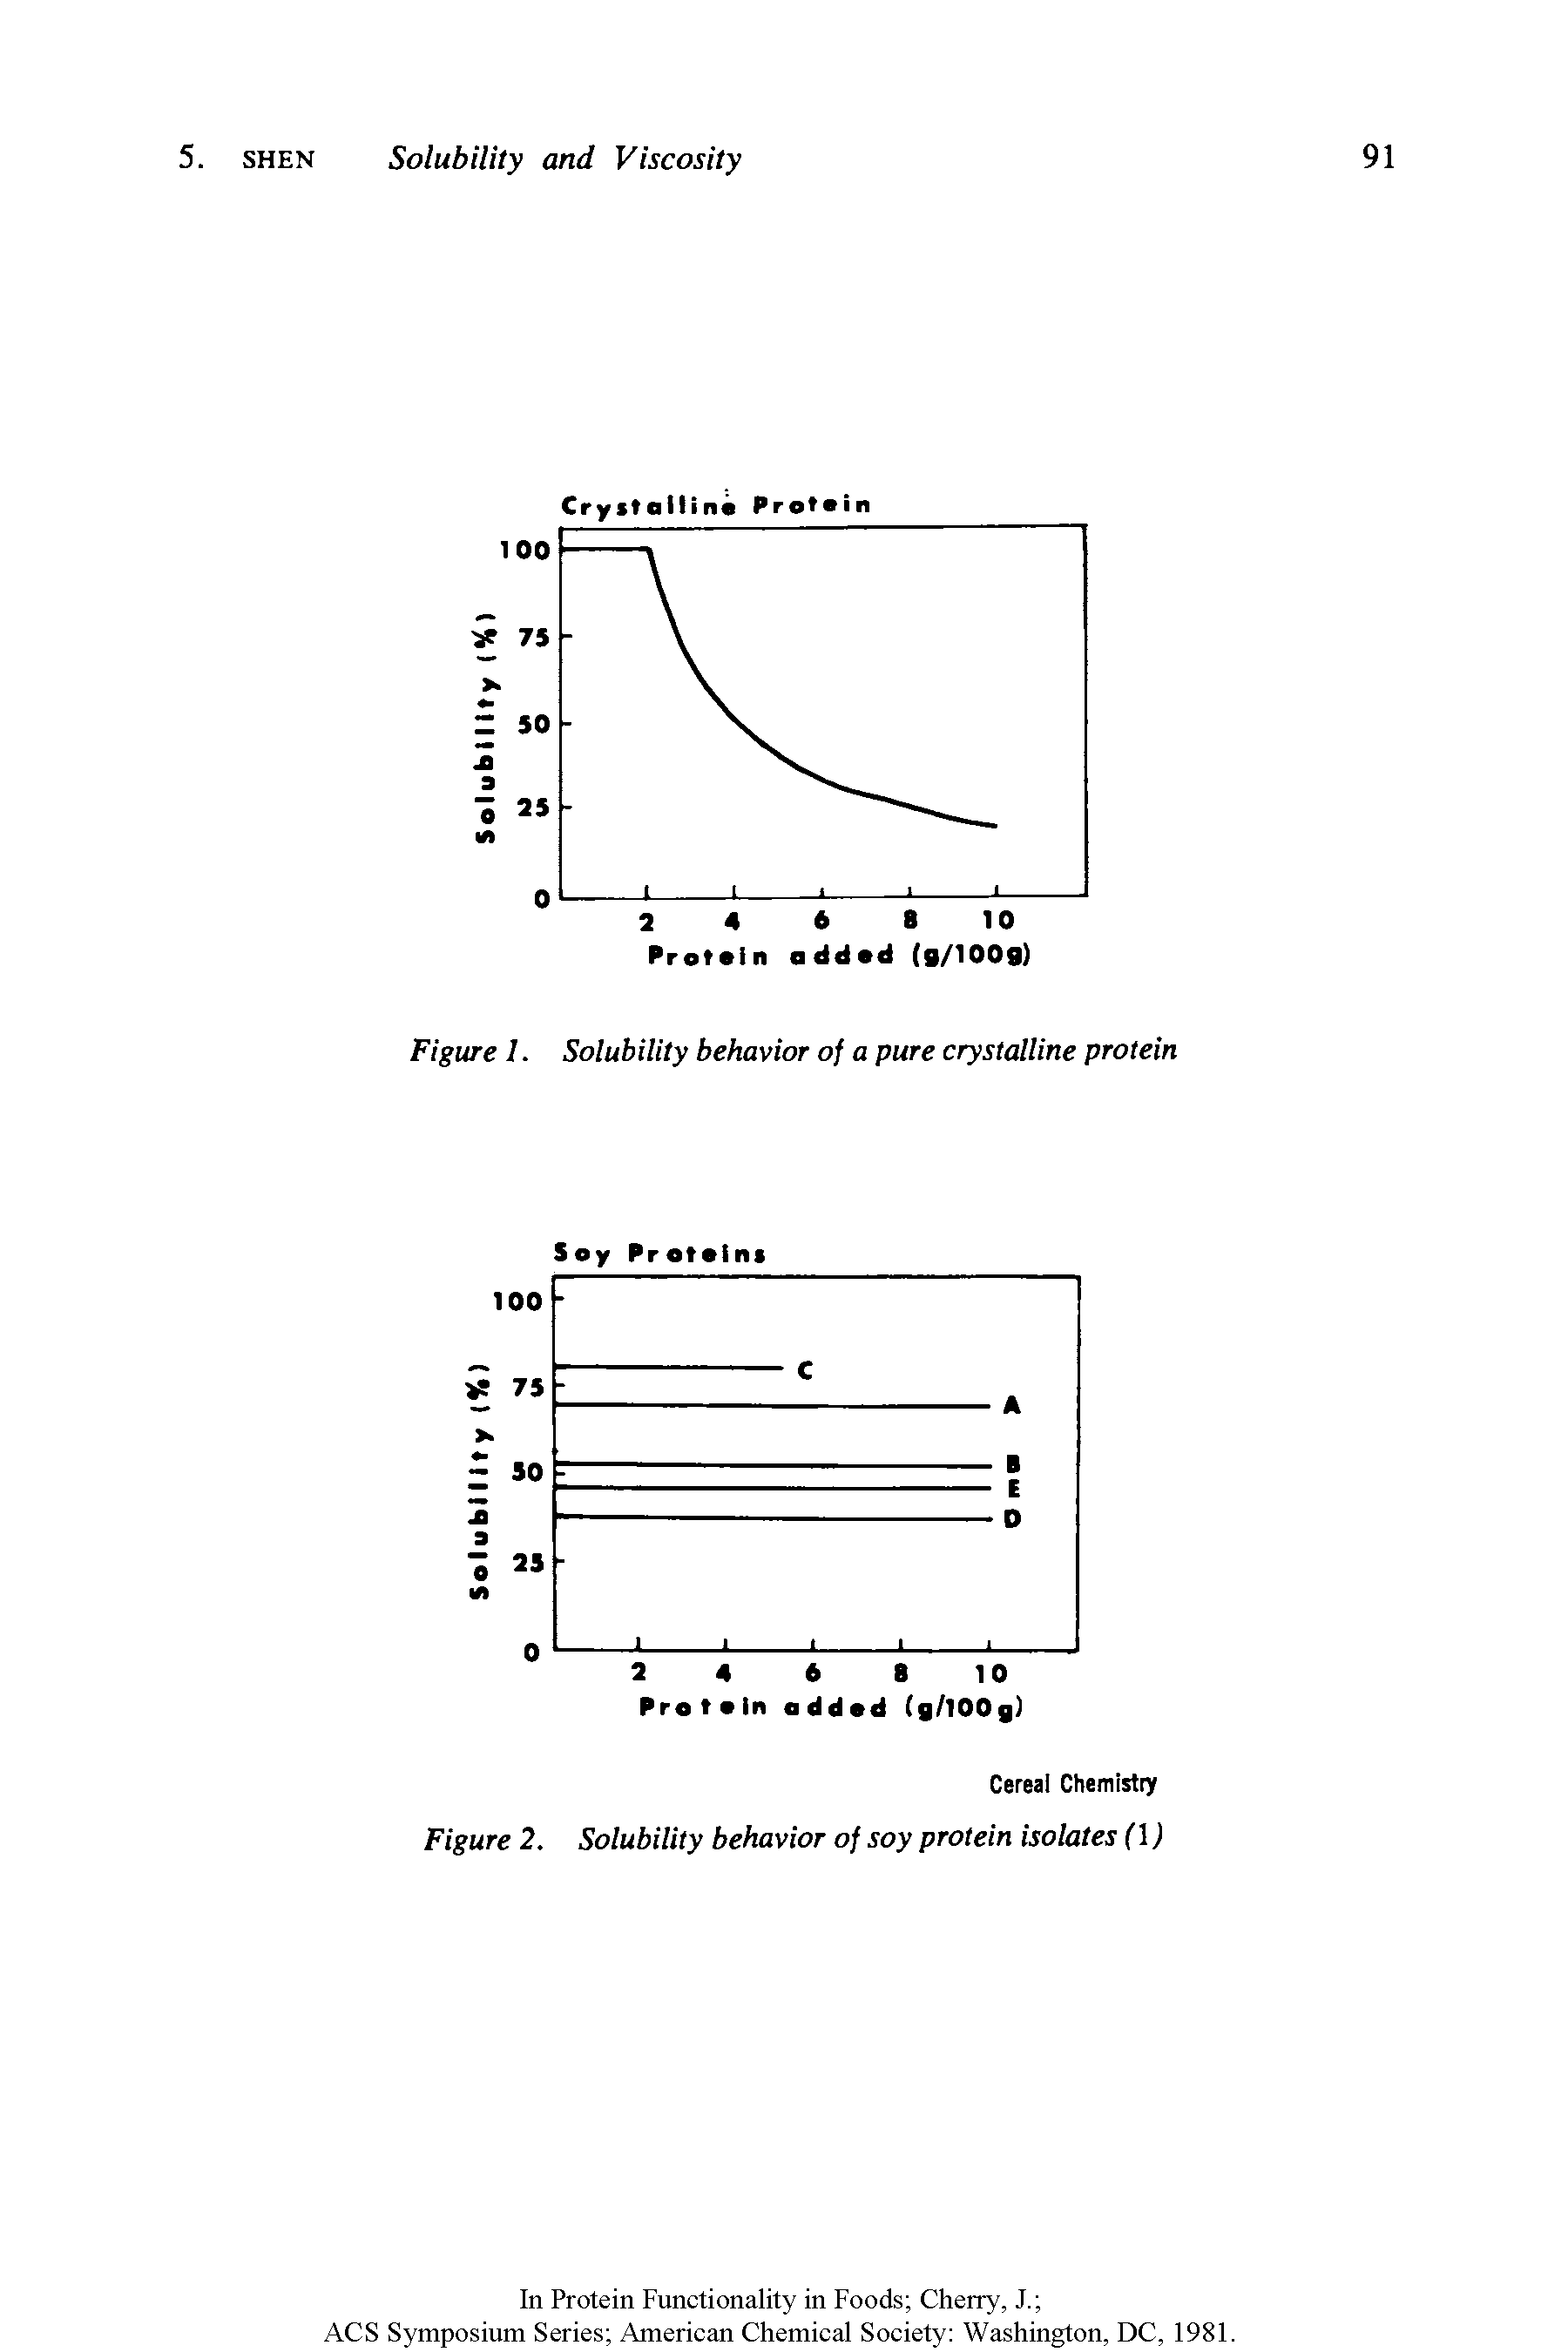 Figure 1. Solubility behavior of a pure crystalline protein...